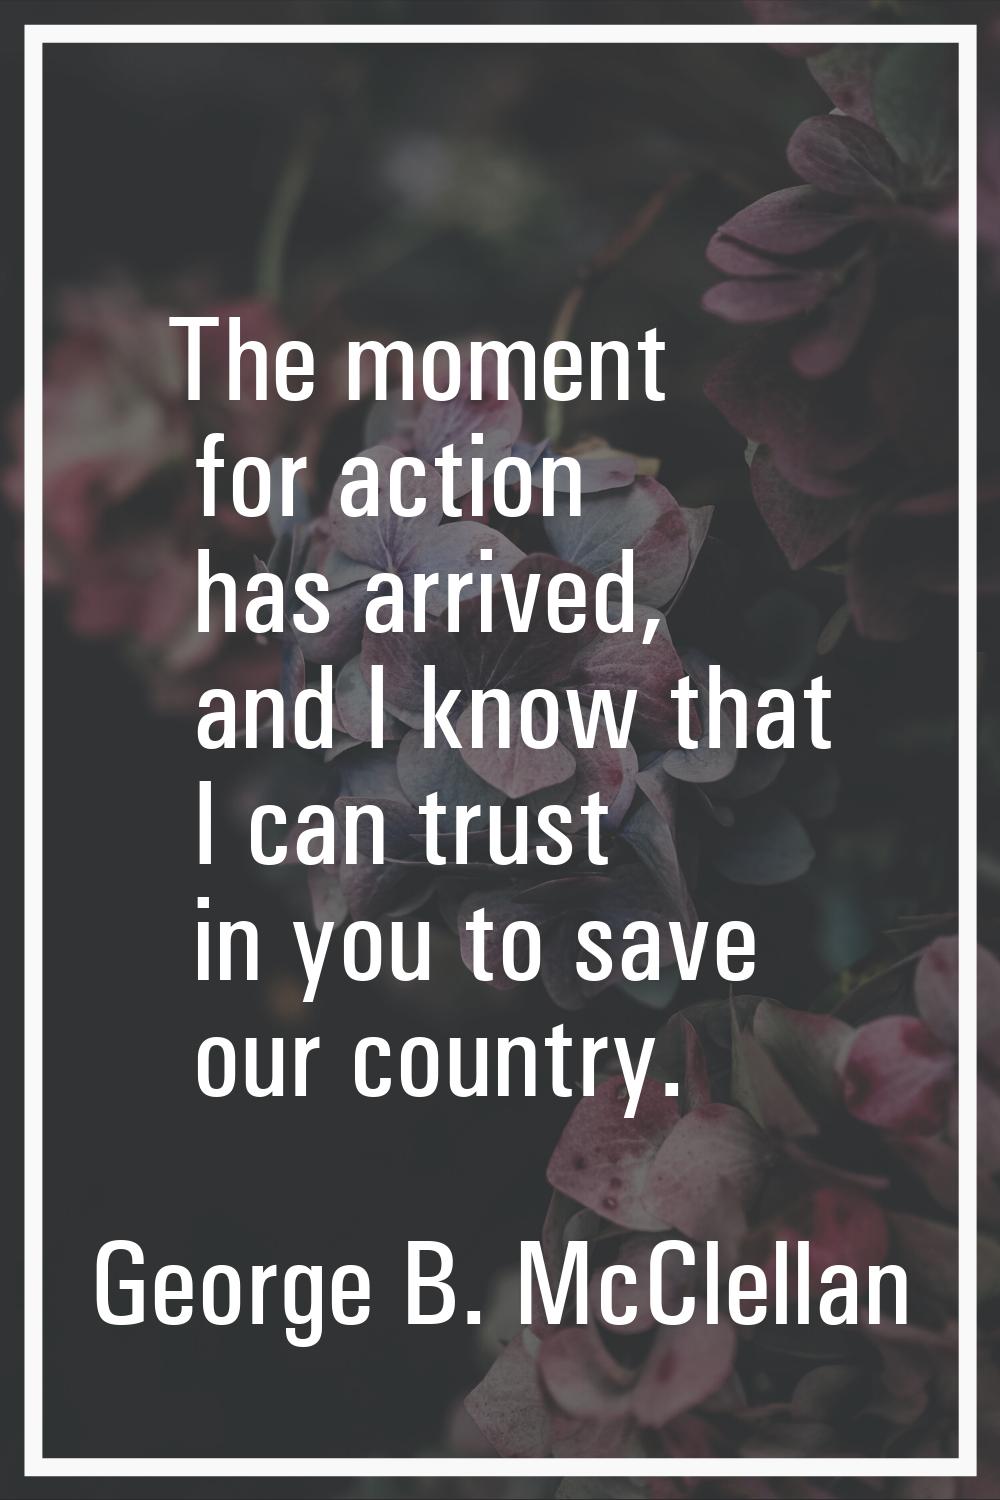 The moment for action has arrived, and I know that I can trust in you to save our country.